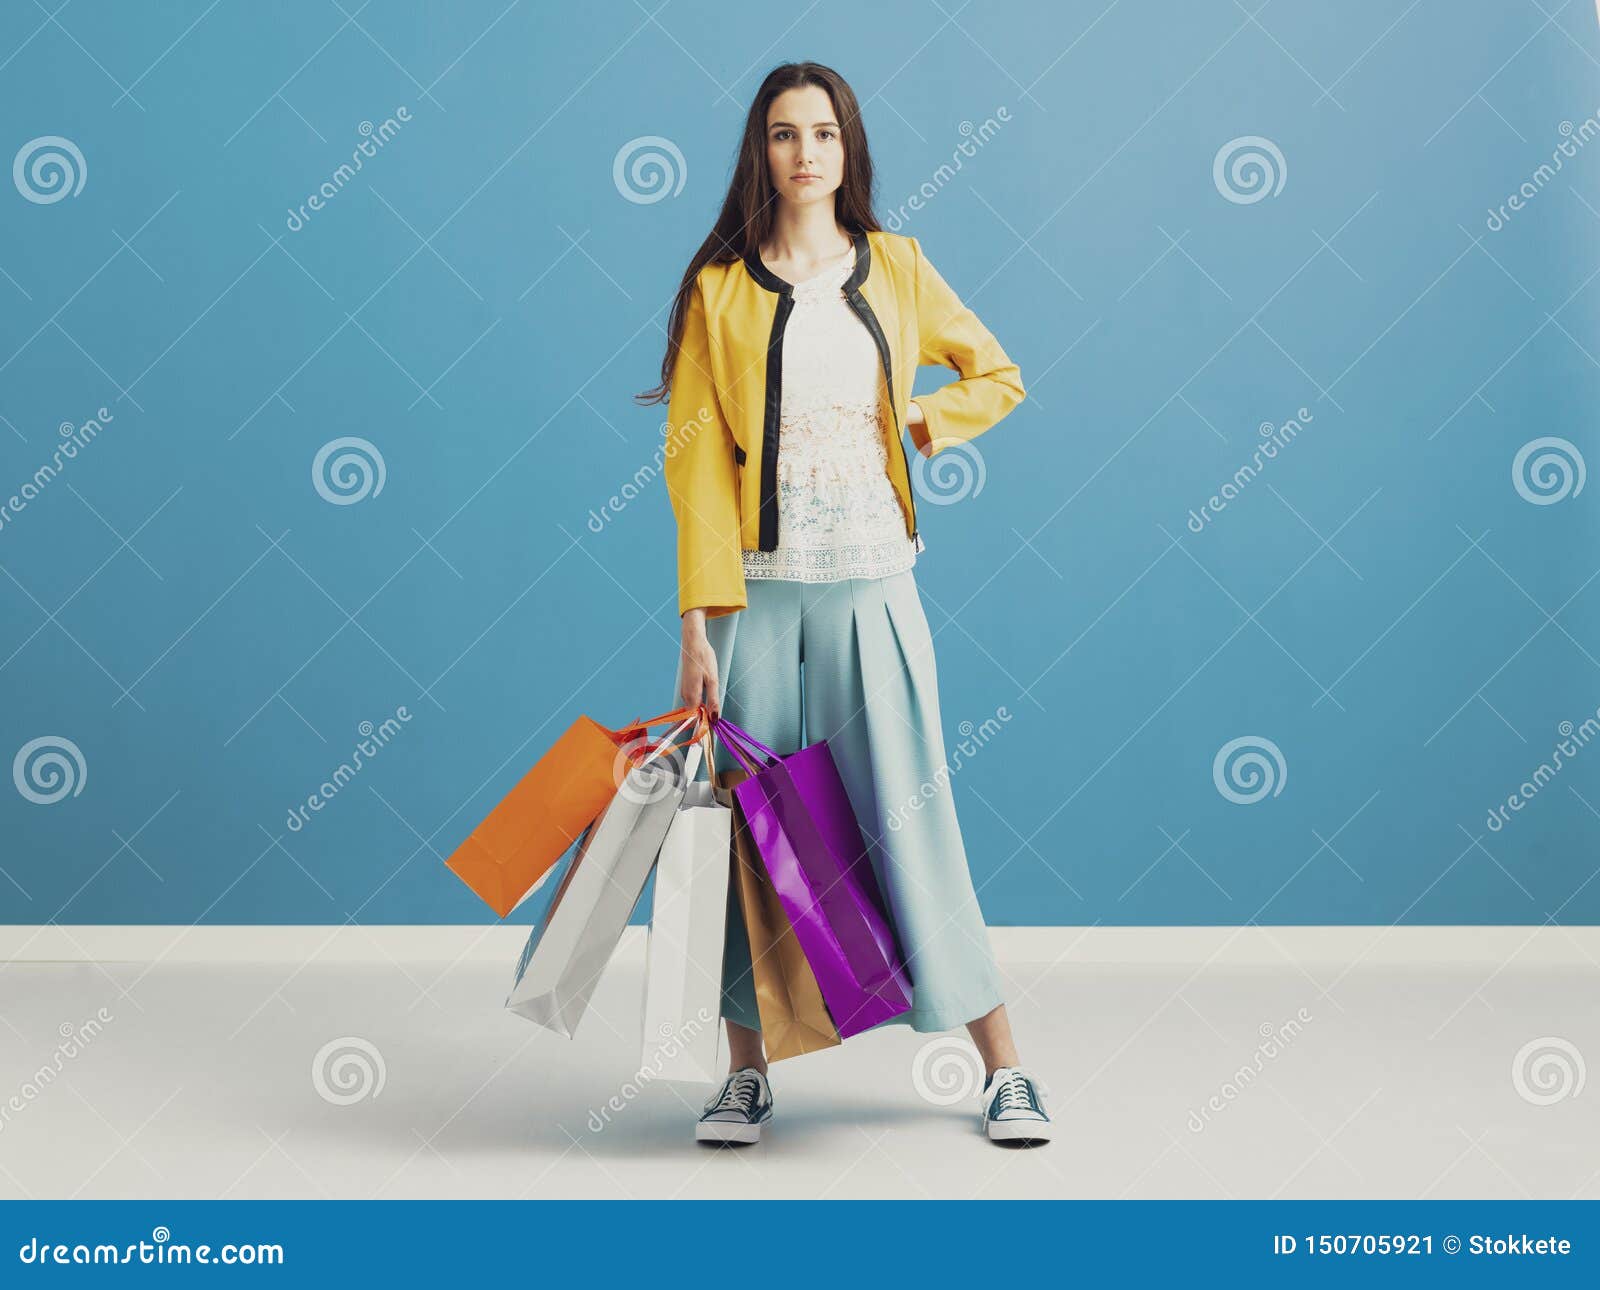 Fashionable Woman with Shopping Bags Stock Image - Image of people ...